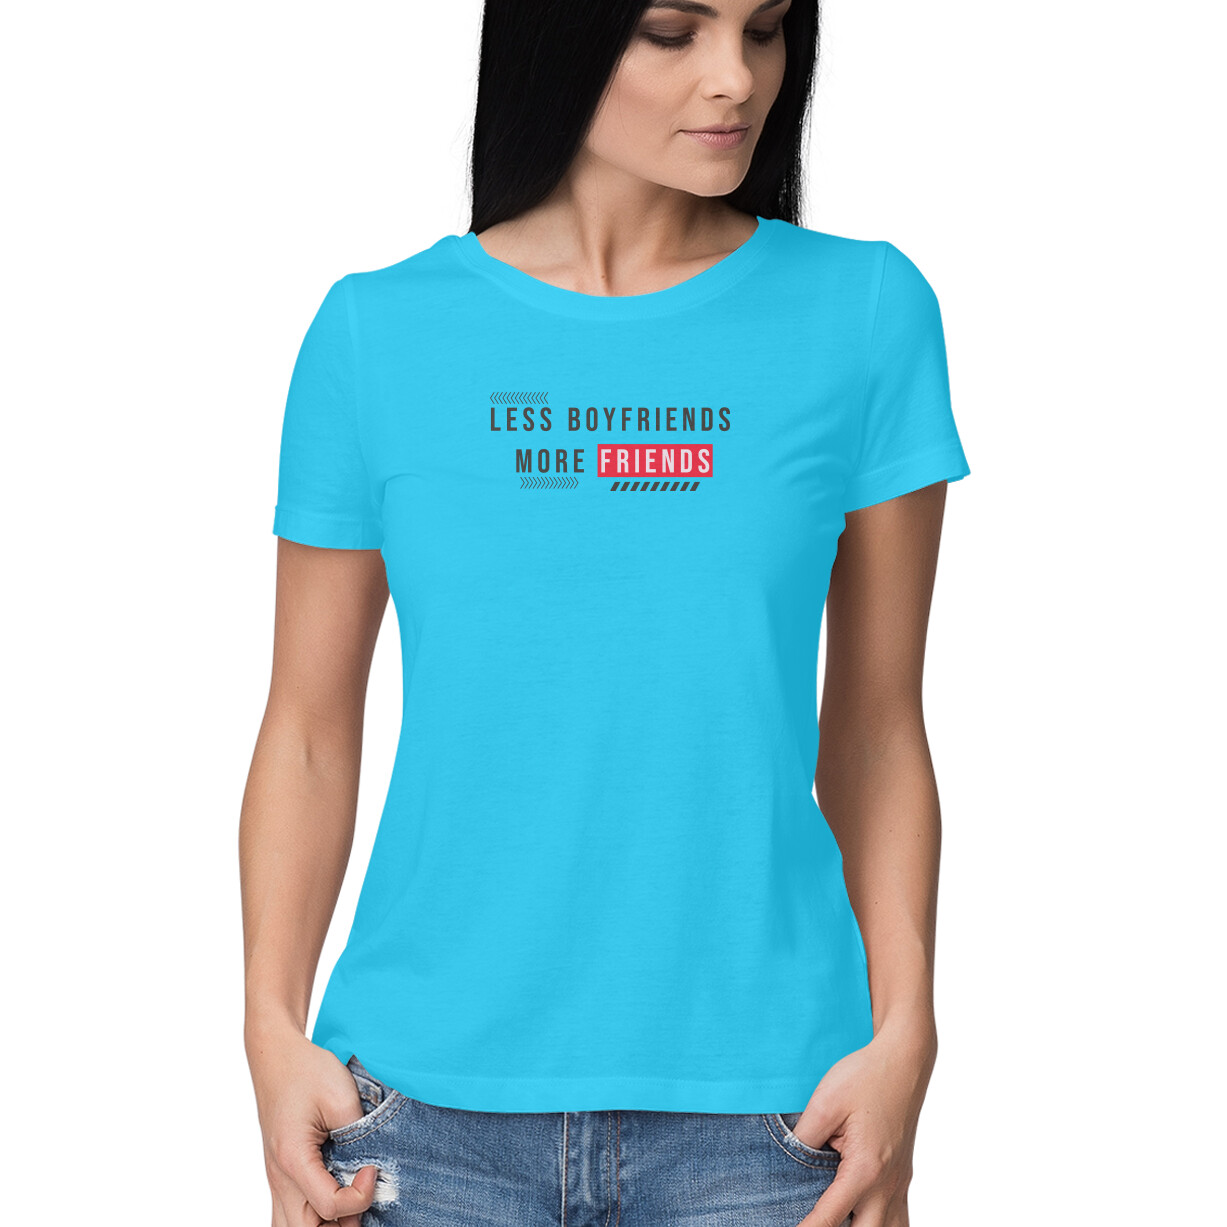 LESS BOYFRIENDS MORE FRIENDS, Funny T-shirt quotes and sayings